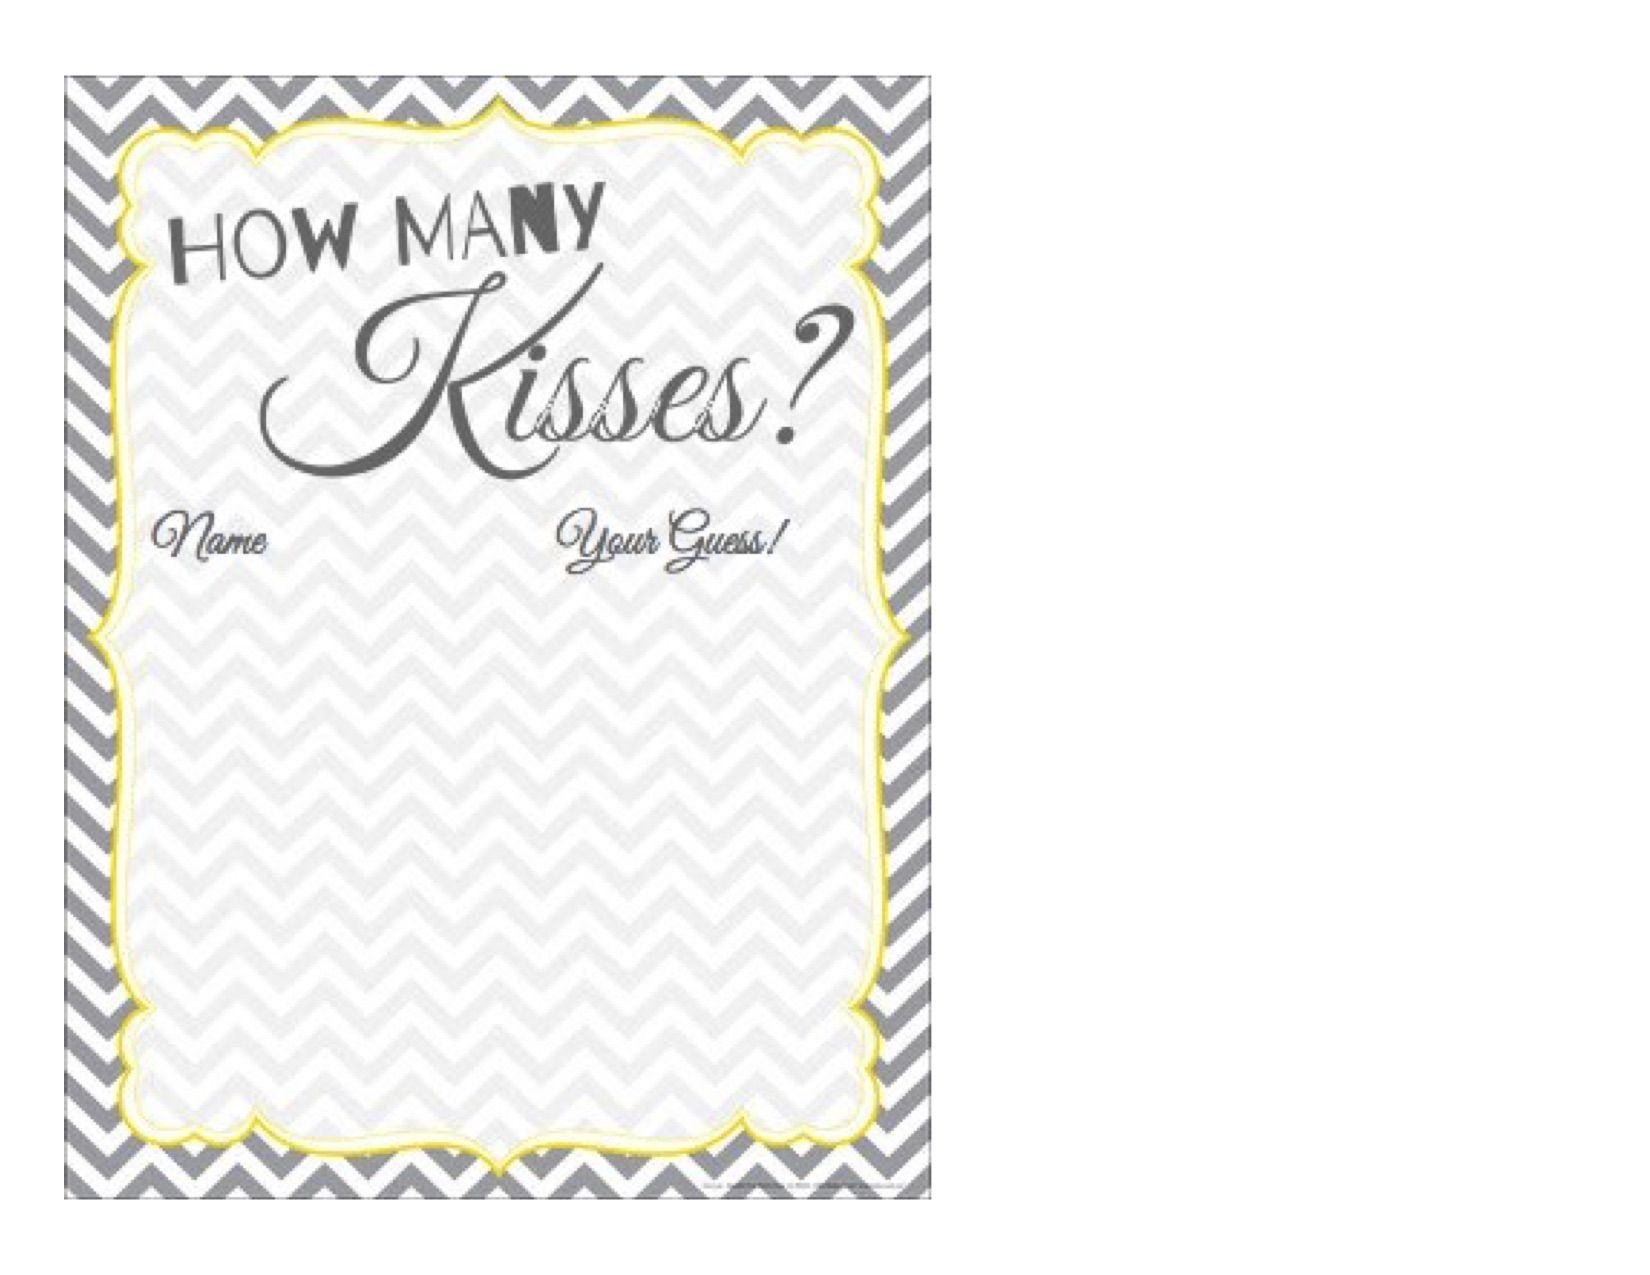 How Many Kisses? Free Printable Guessing Paper - Grey And Yellow - How Many Kisses Game Free Printable